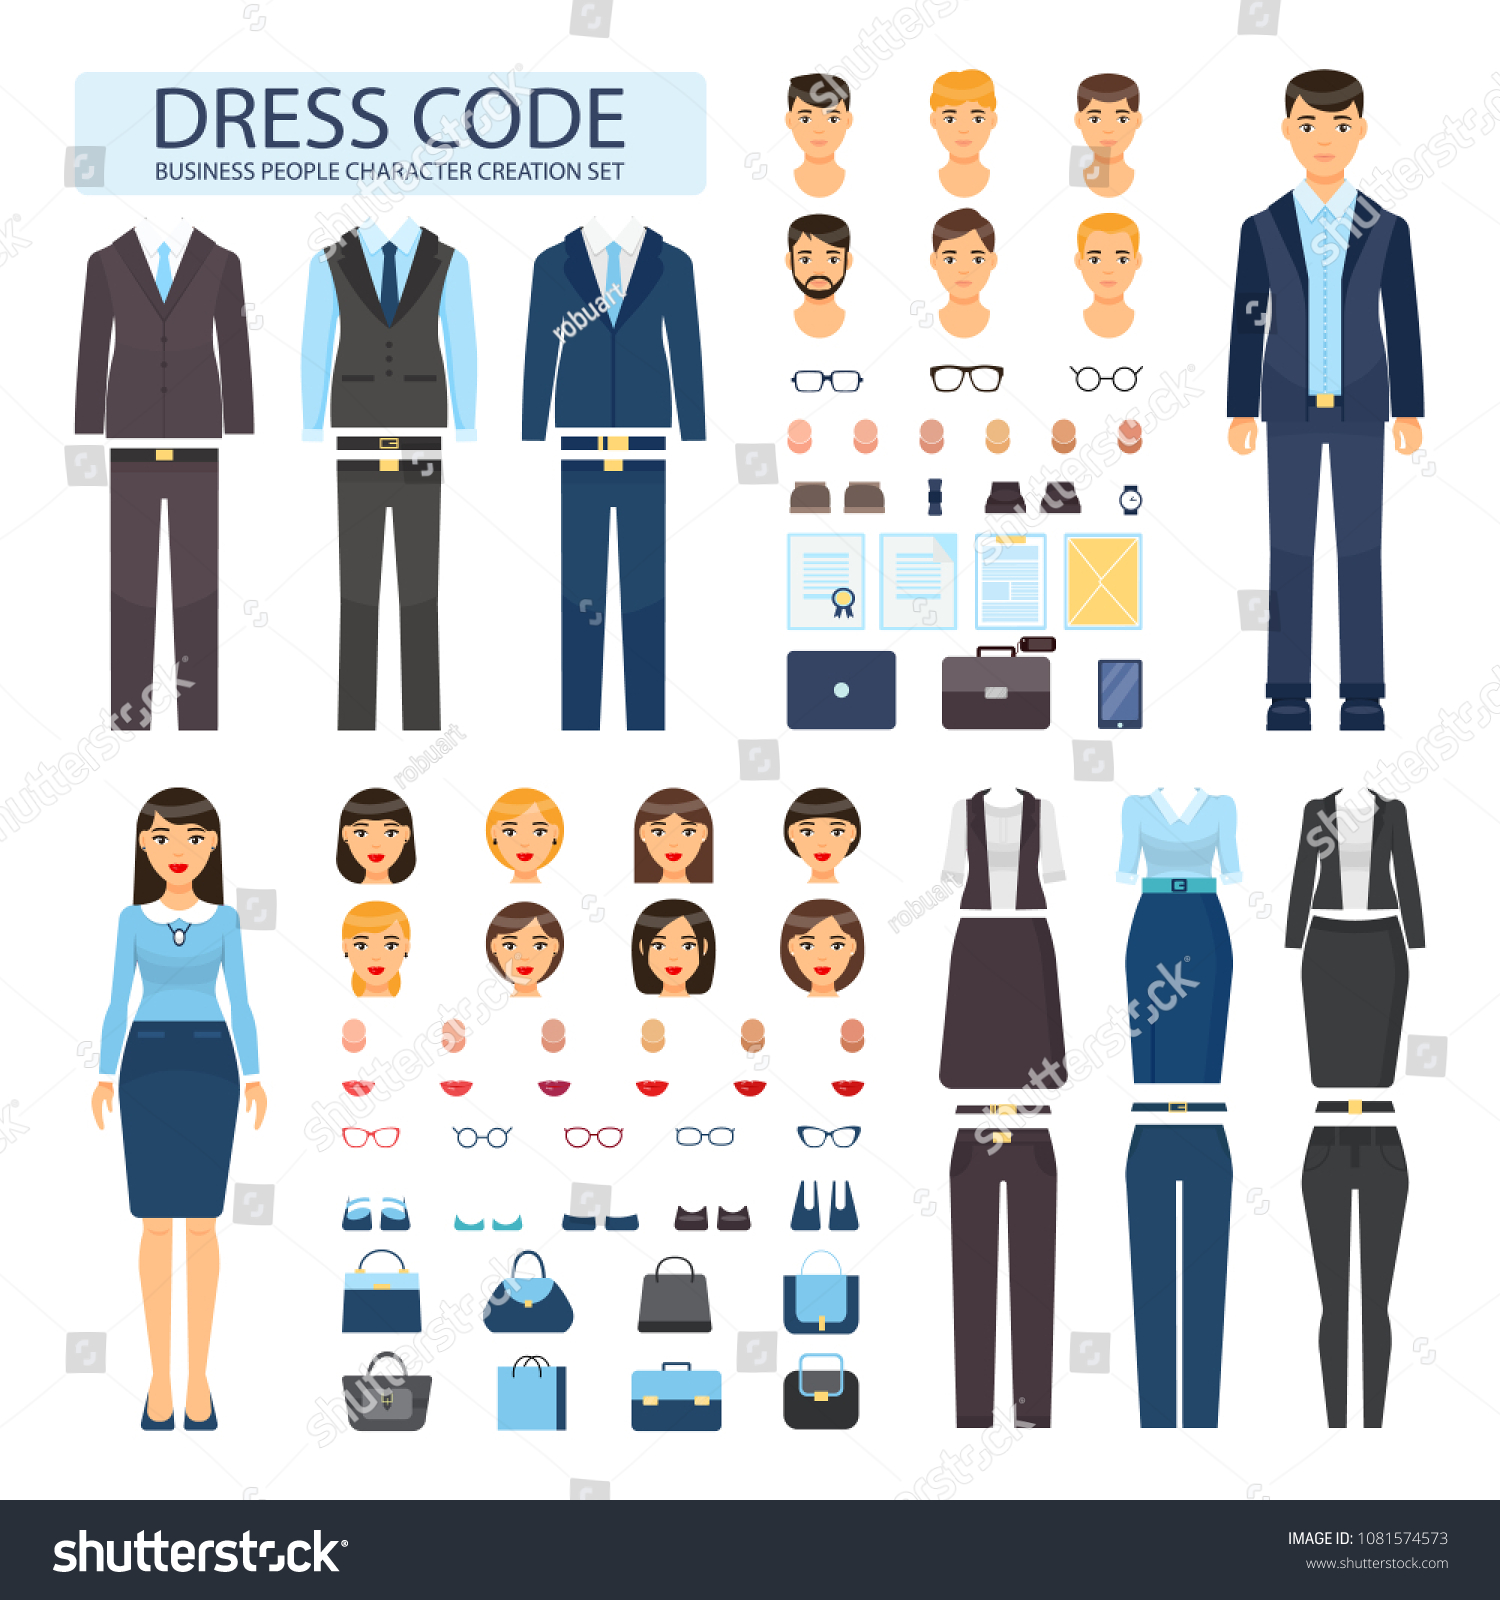 Woman Dress Code Guide Infographic White Stock Vector (Royalty Free)  537981907